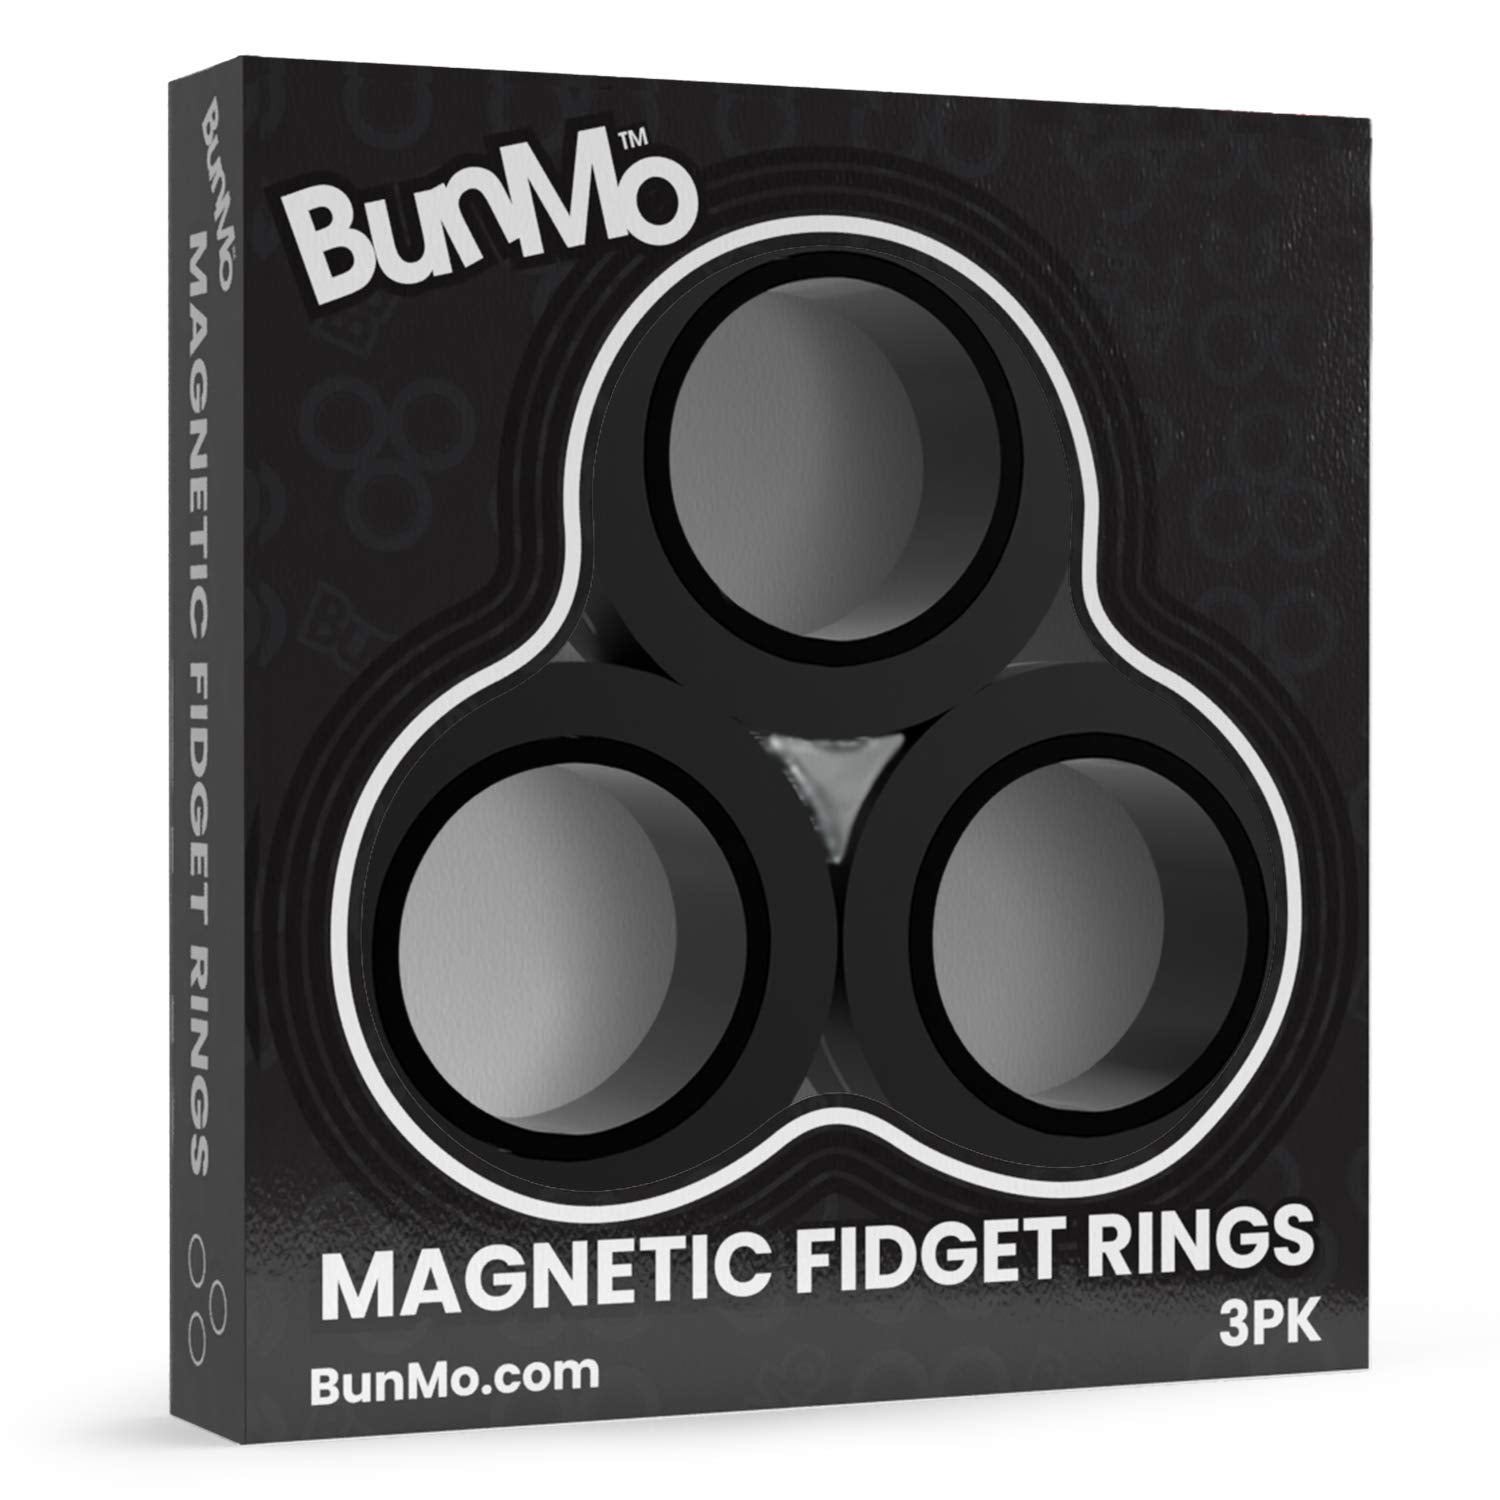 BunMo Fidget Toys - Magnetic Fidget Rings Fidget Toy. The Fidget Ring Spins, Connects, and Separates, Making Ideal Stress Toys and Sensory Toys. Fidget Magnets Make Ideal Stocking Stuffers.